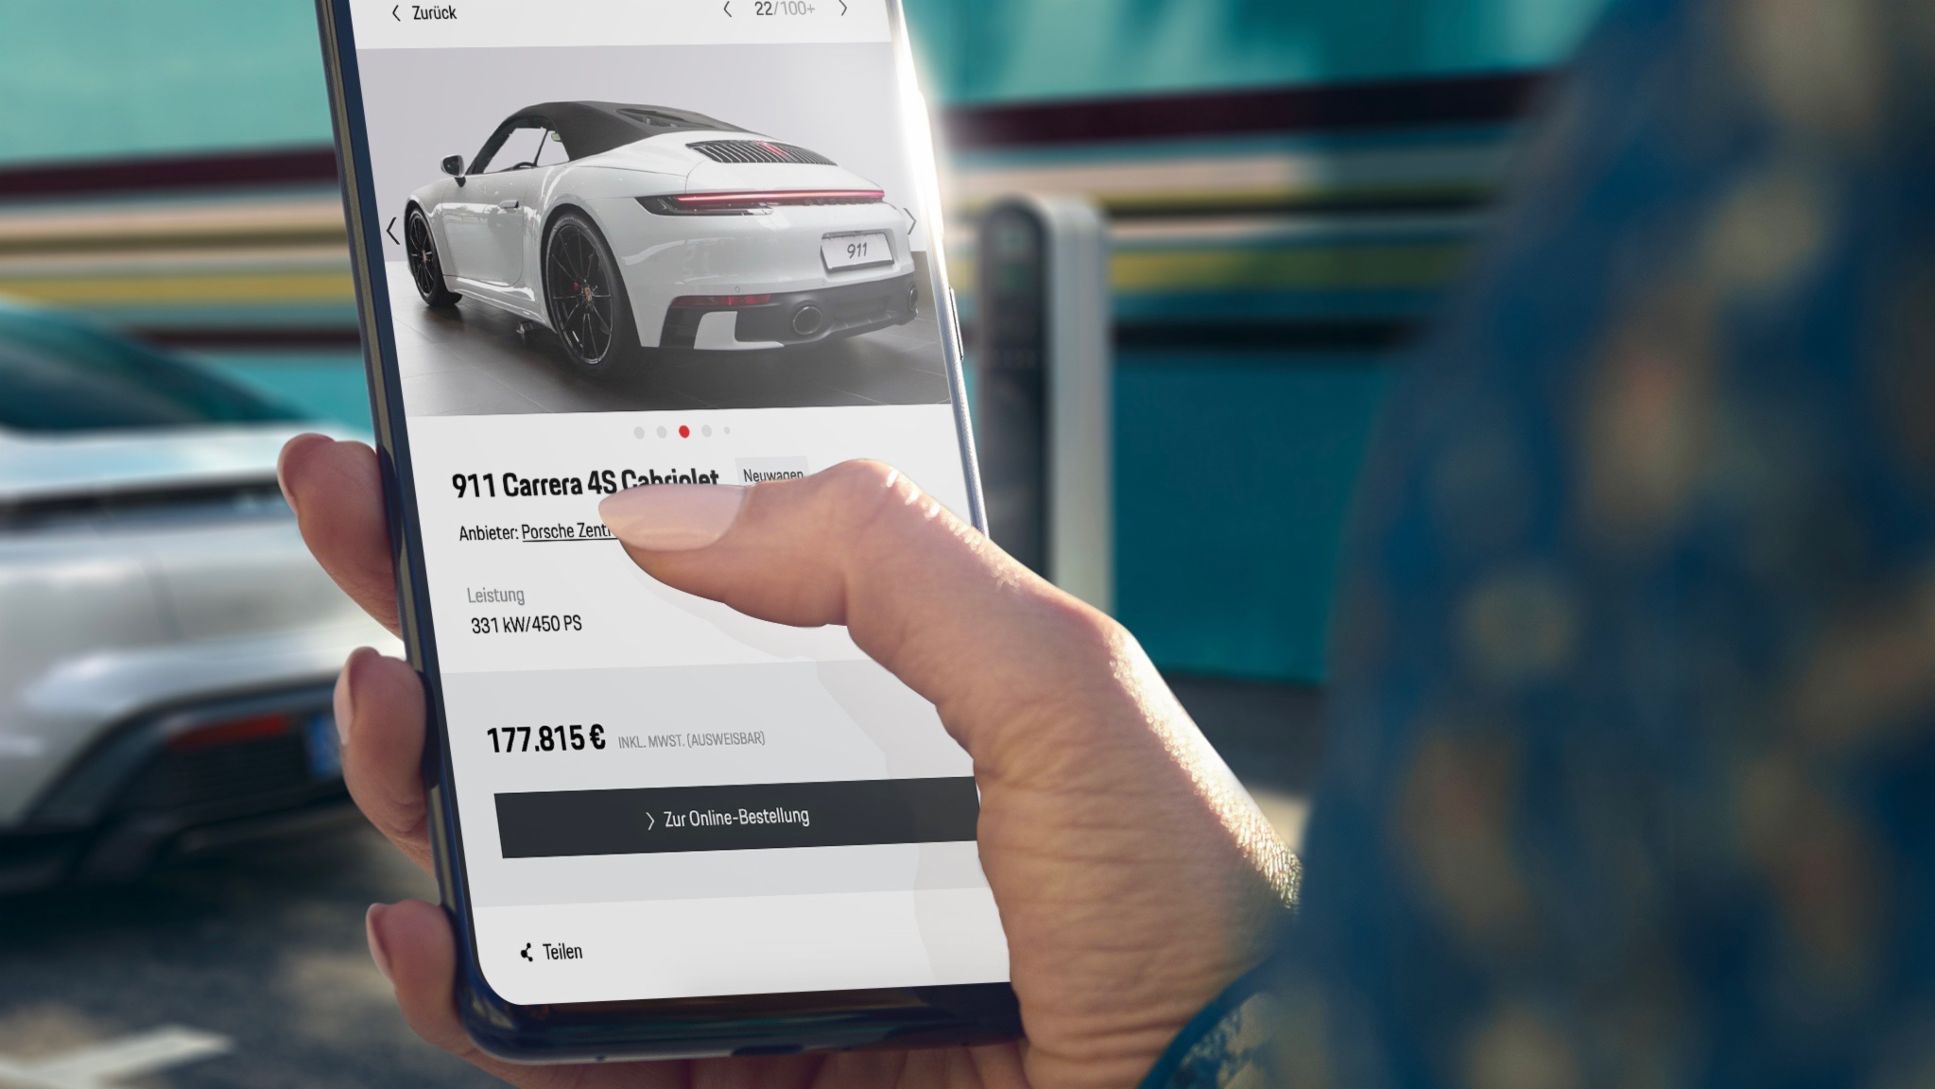 Online product offering for customers extended, 2019, Porsche AG